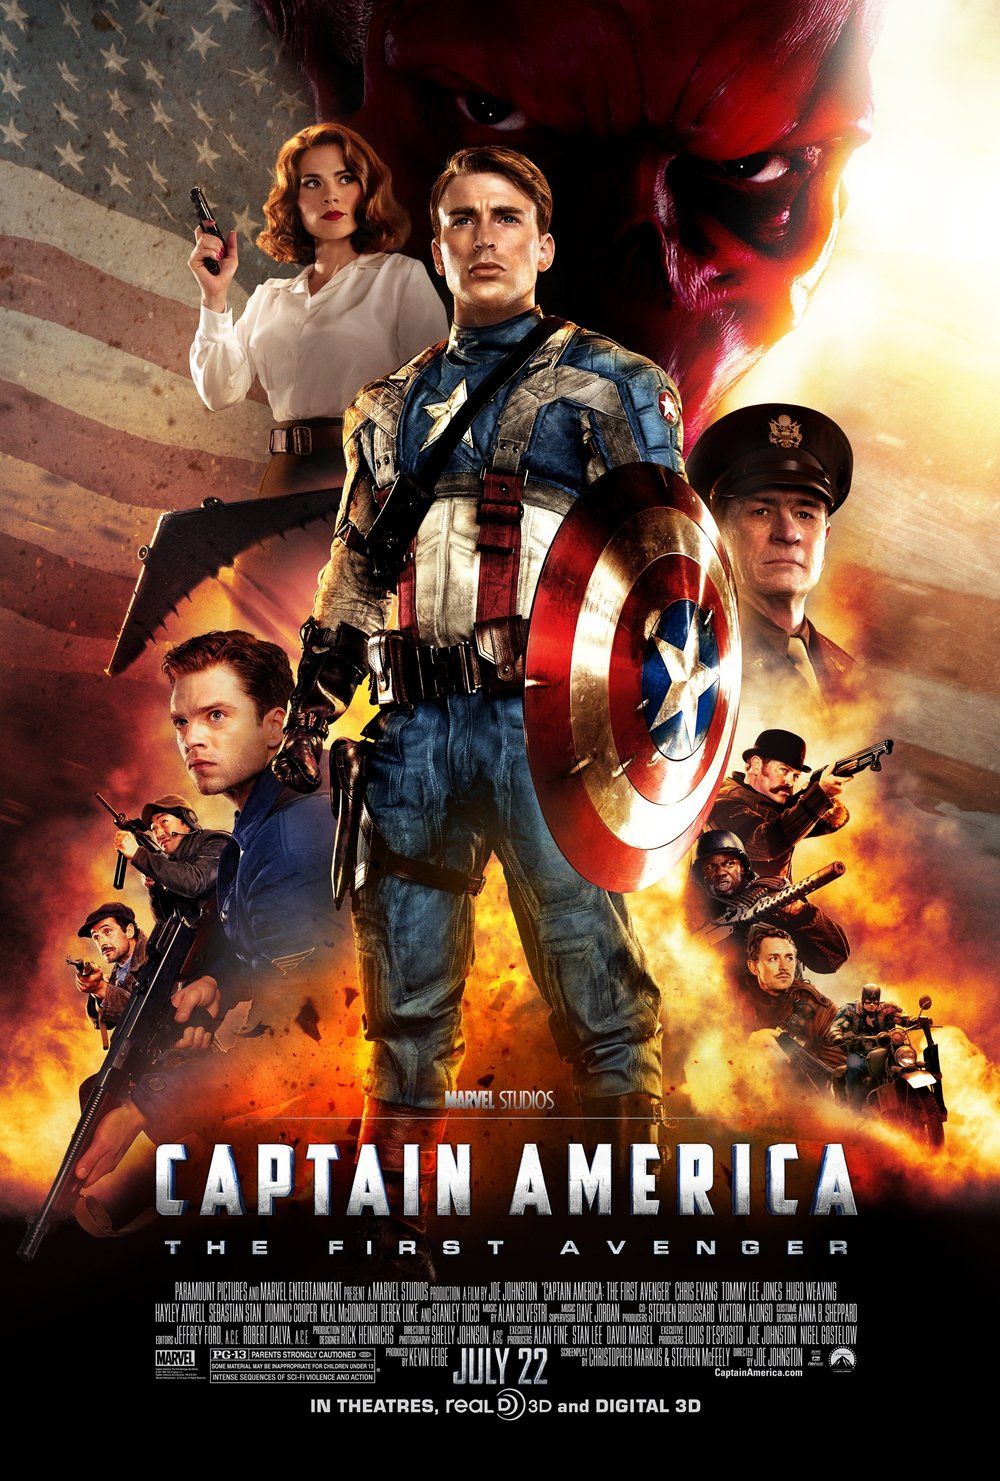 MCU REWATCH REVIEW: Captain America: The First Avenger (2011)